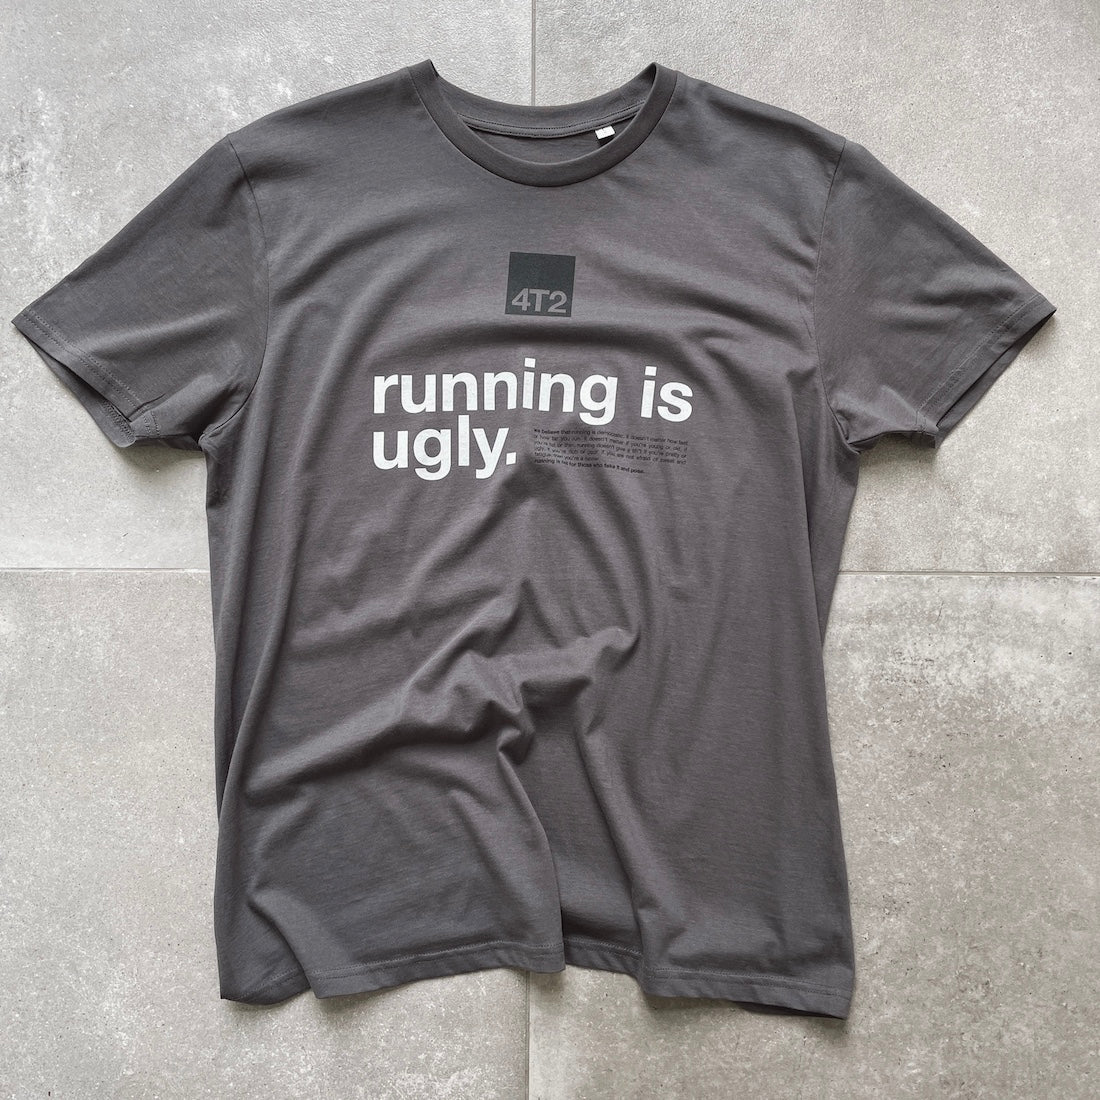 tee, running is ugly, anthracite.